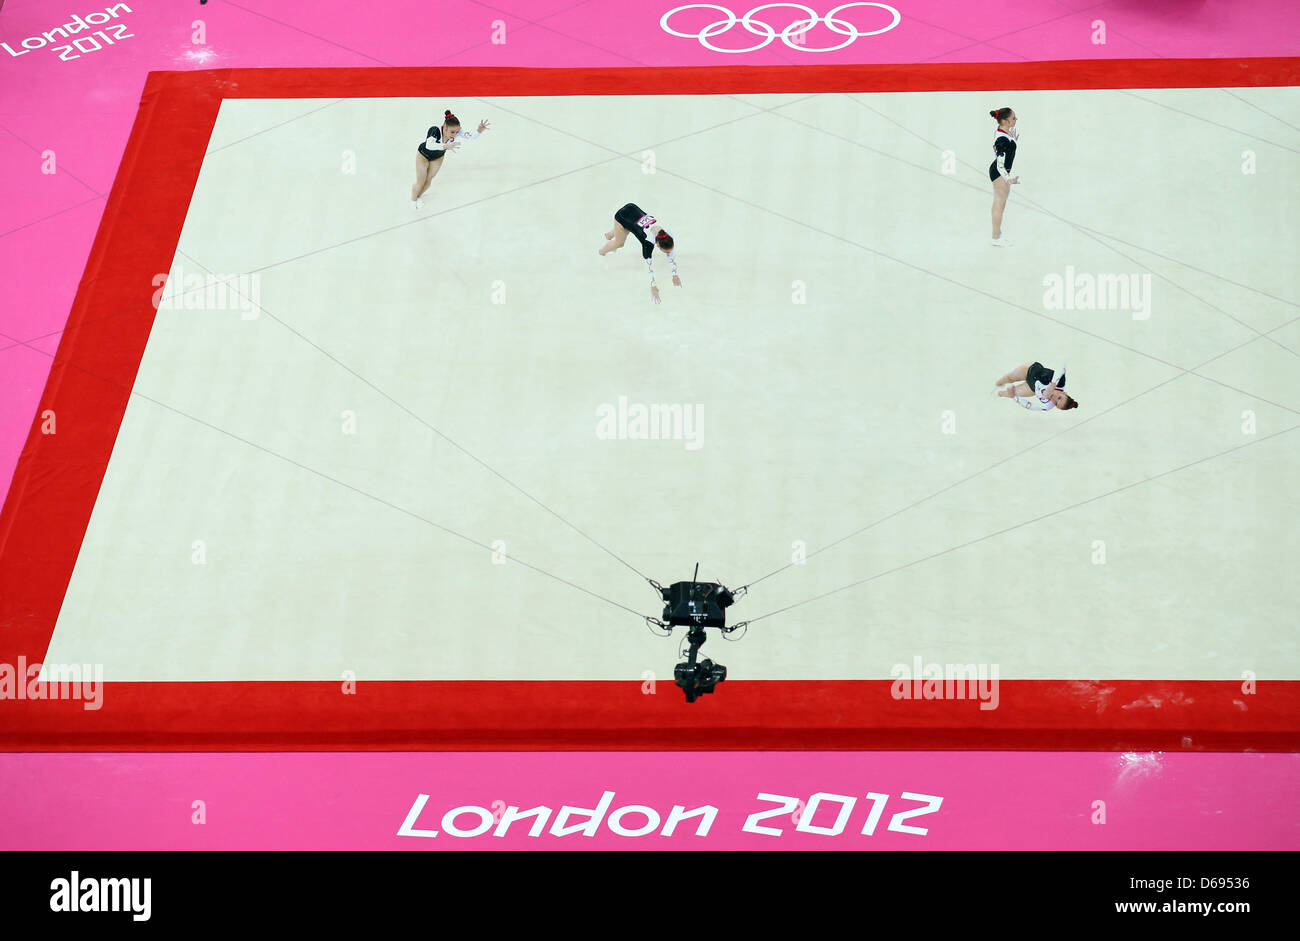 Germany's gymnast Nadine Jarosch performs floor exercises during women's qualification in North Greenwich Arena at the London 2012 Olympic Games, London, Great Britain, 29 July 2012. (multiple exposure). The spider-cam is filming her. The 2012 Summer Olympic Games will be held in London from 27 July to 12 August 2012. Photo: Friso Gentsch dpa  +++(c) dpa - Bildfunk+++ Stock Photo